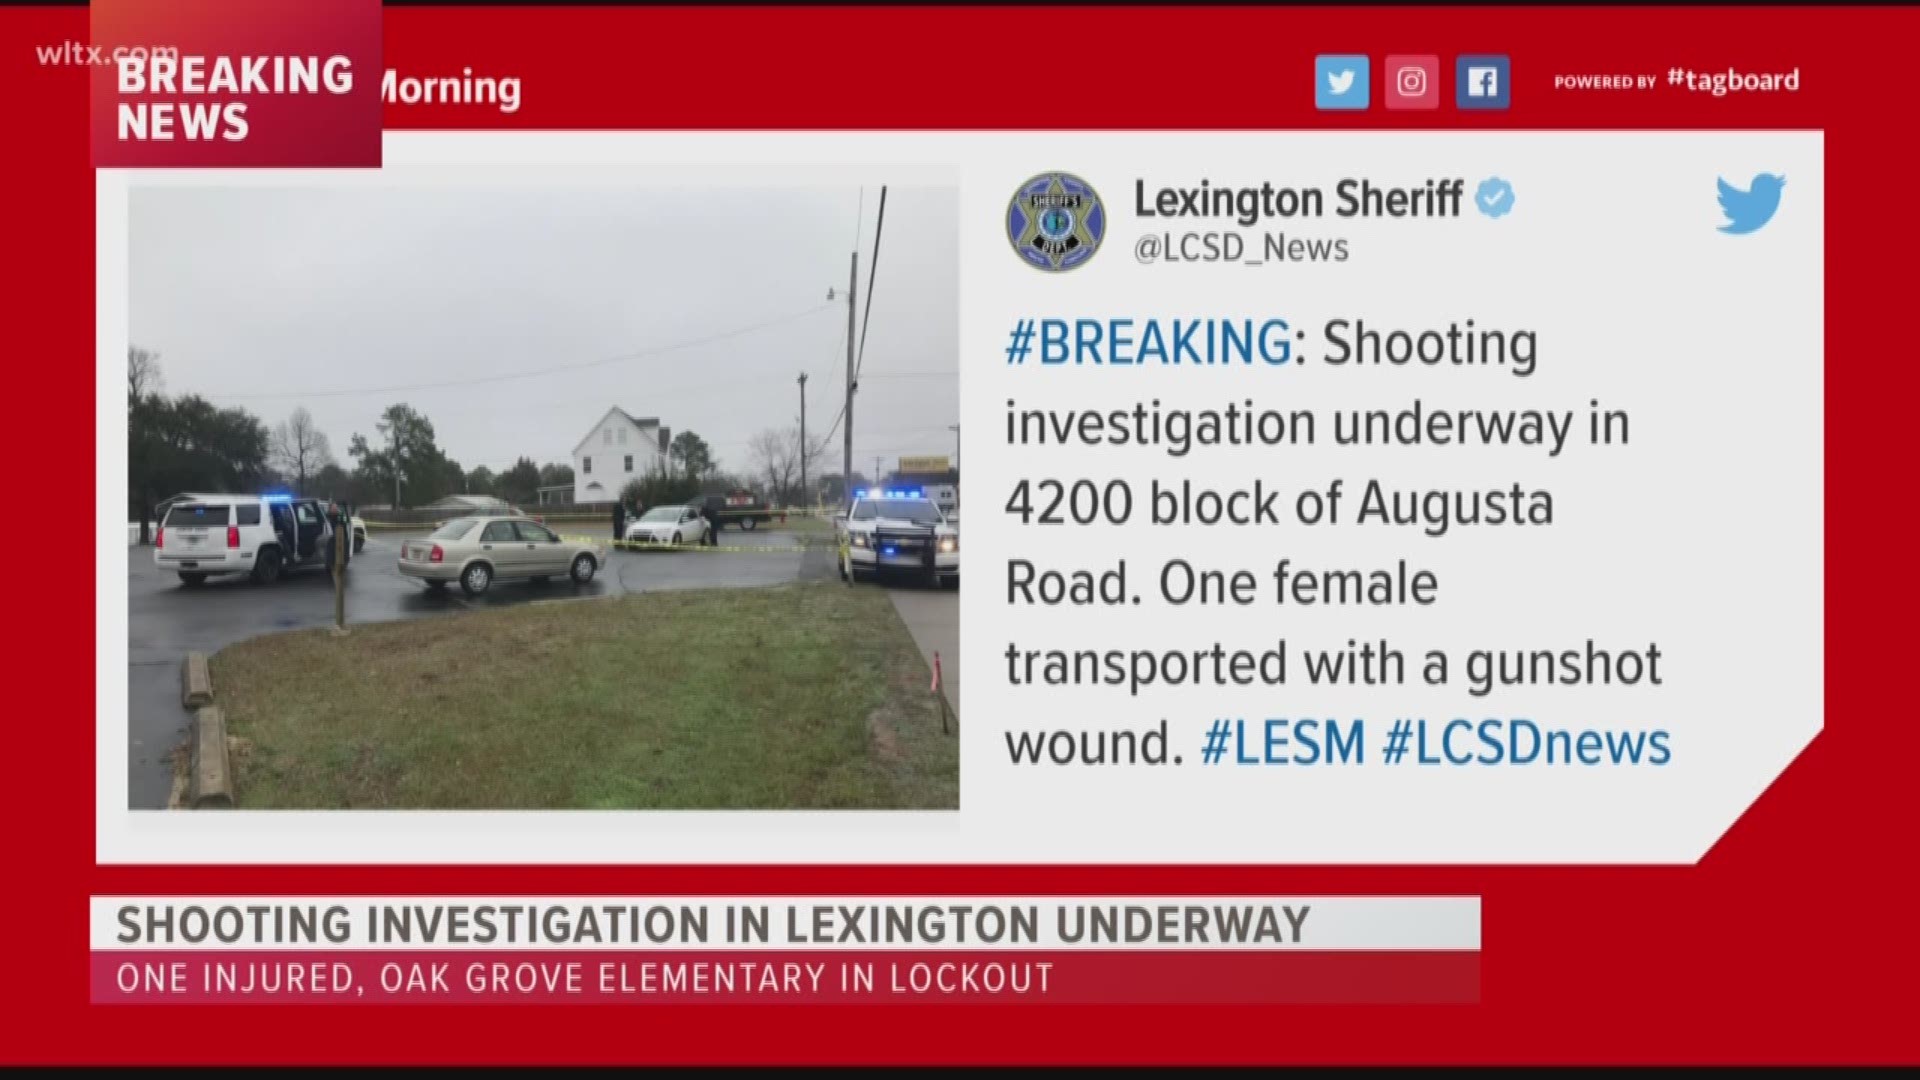 Lexington County Deputies said one person was injured in a shooting on Augusta Road on Thursday.